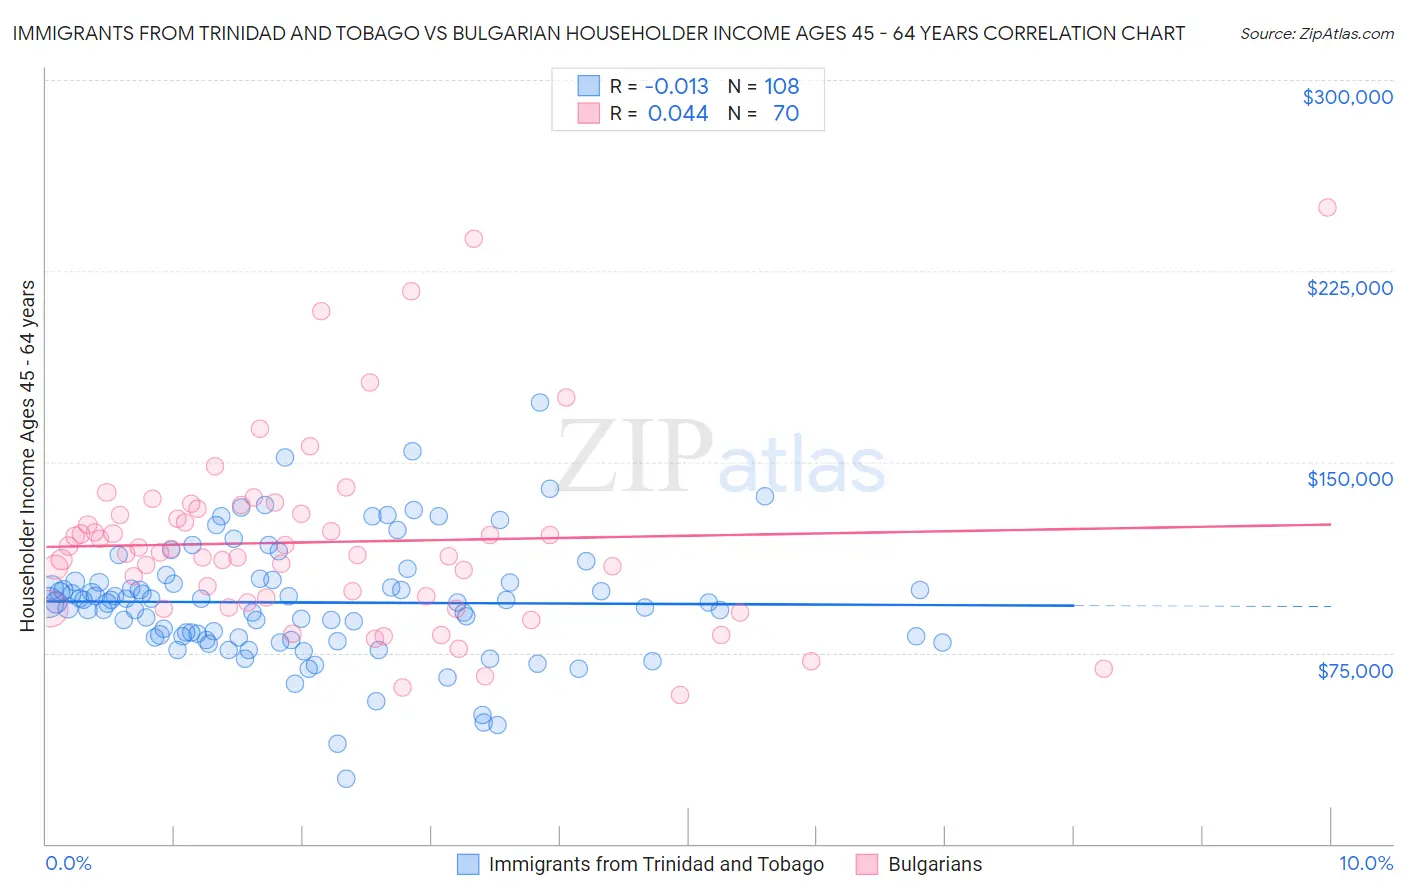 Immigrants from Trinidad and Tobago vs Bulgarian Householder Income Ages 45 - 64 years